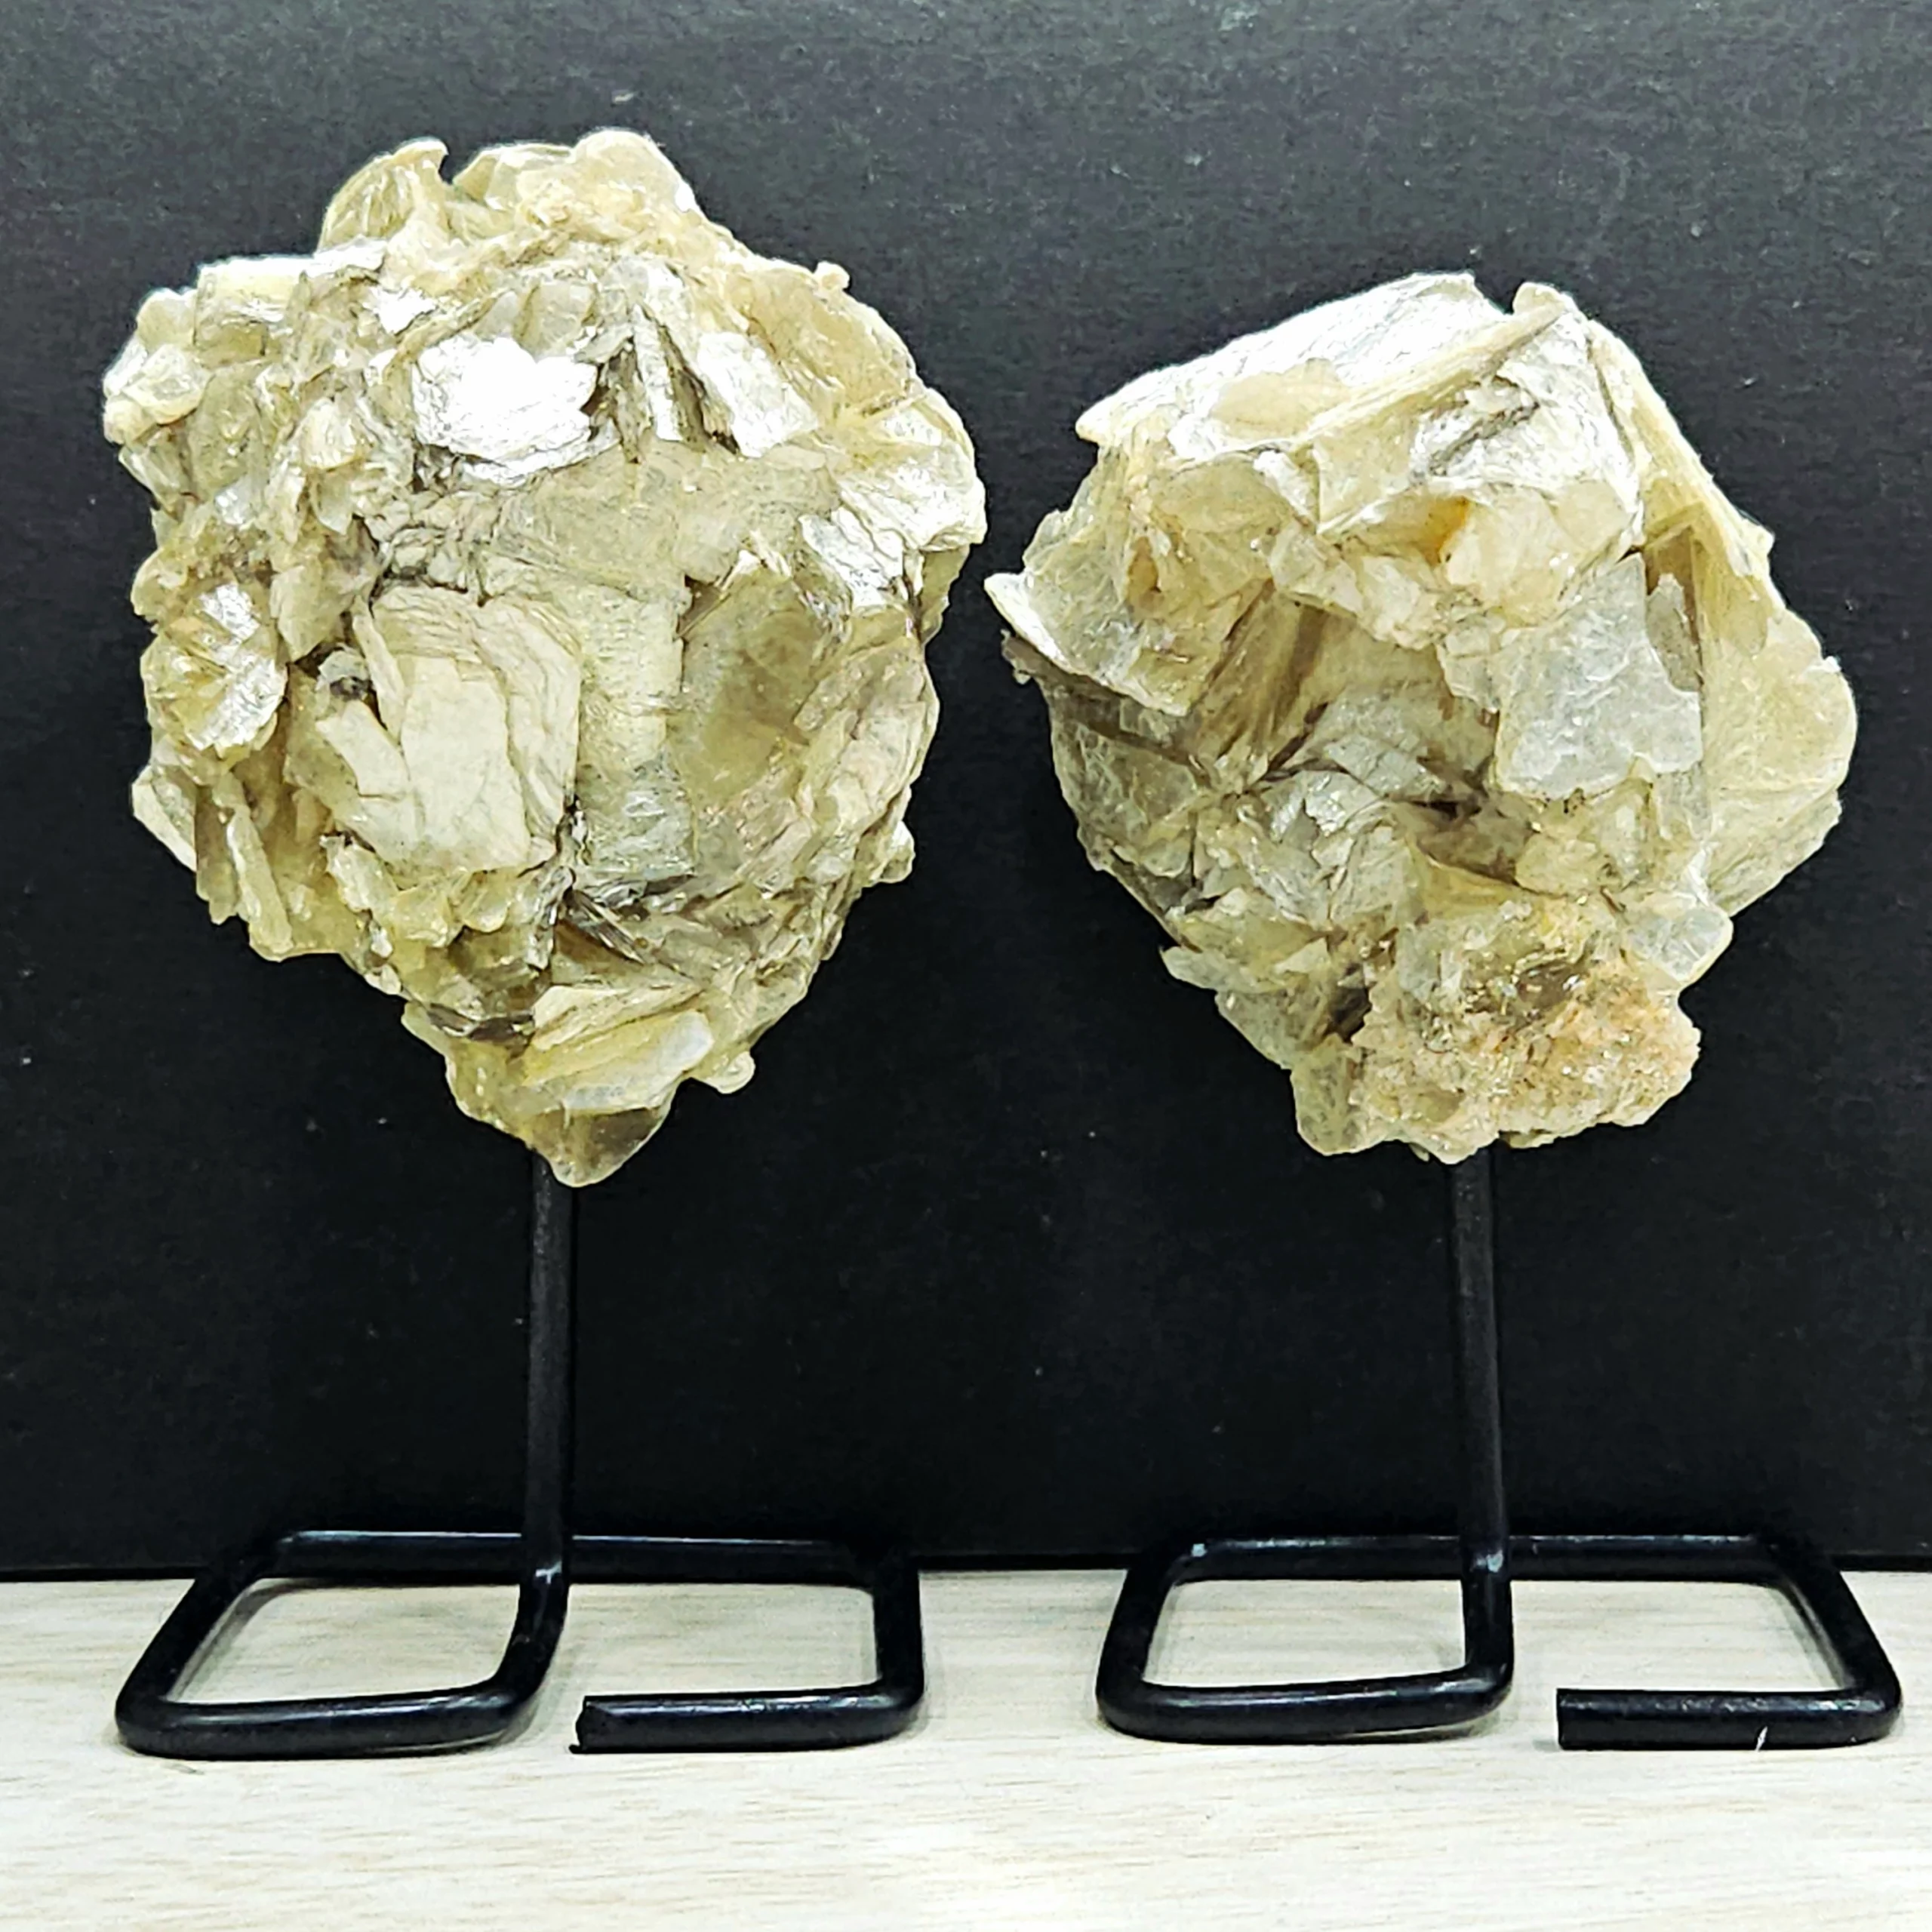 Muscovite Mica Crystal Specimen on stand - 1pc